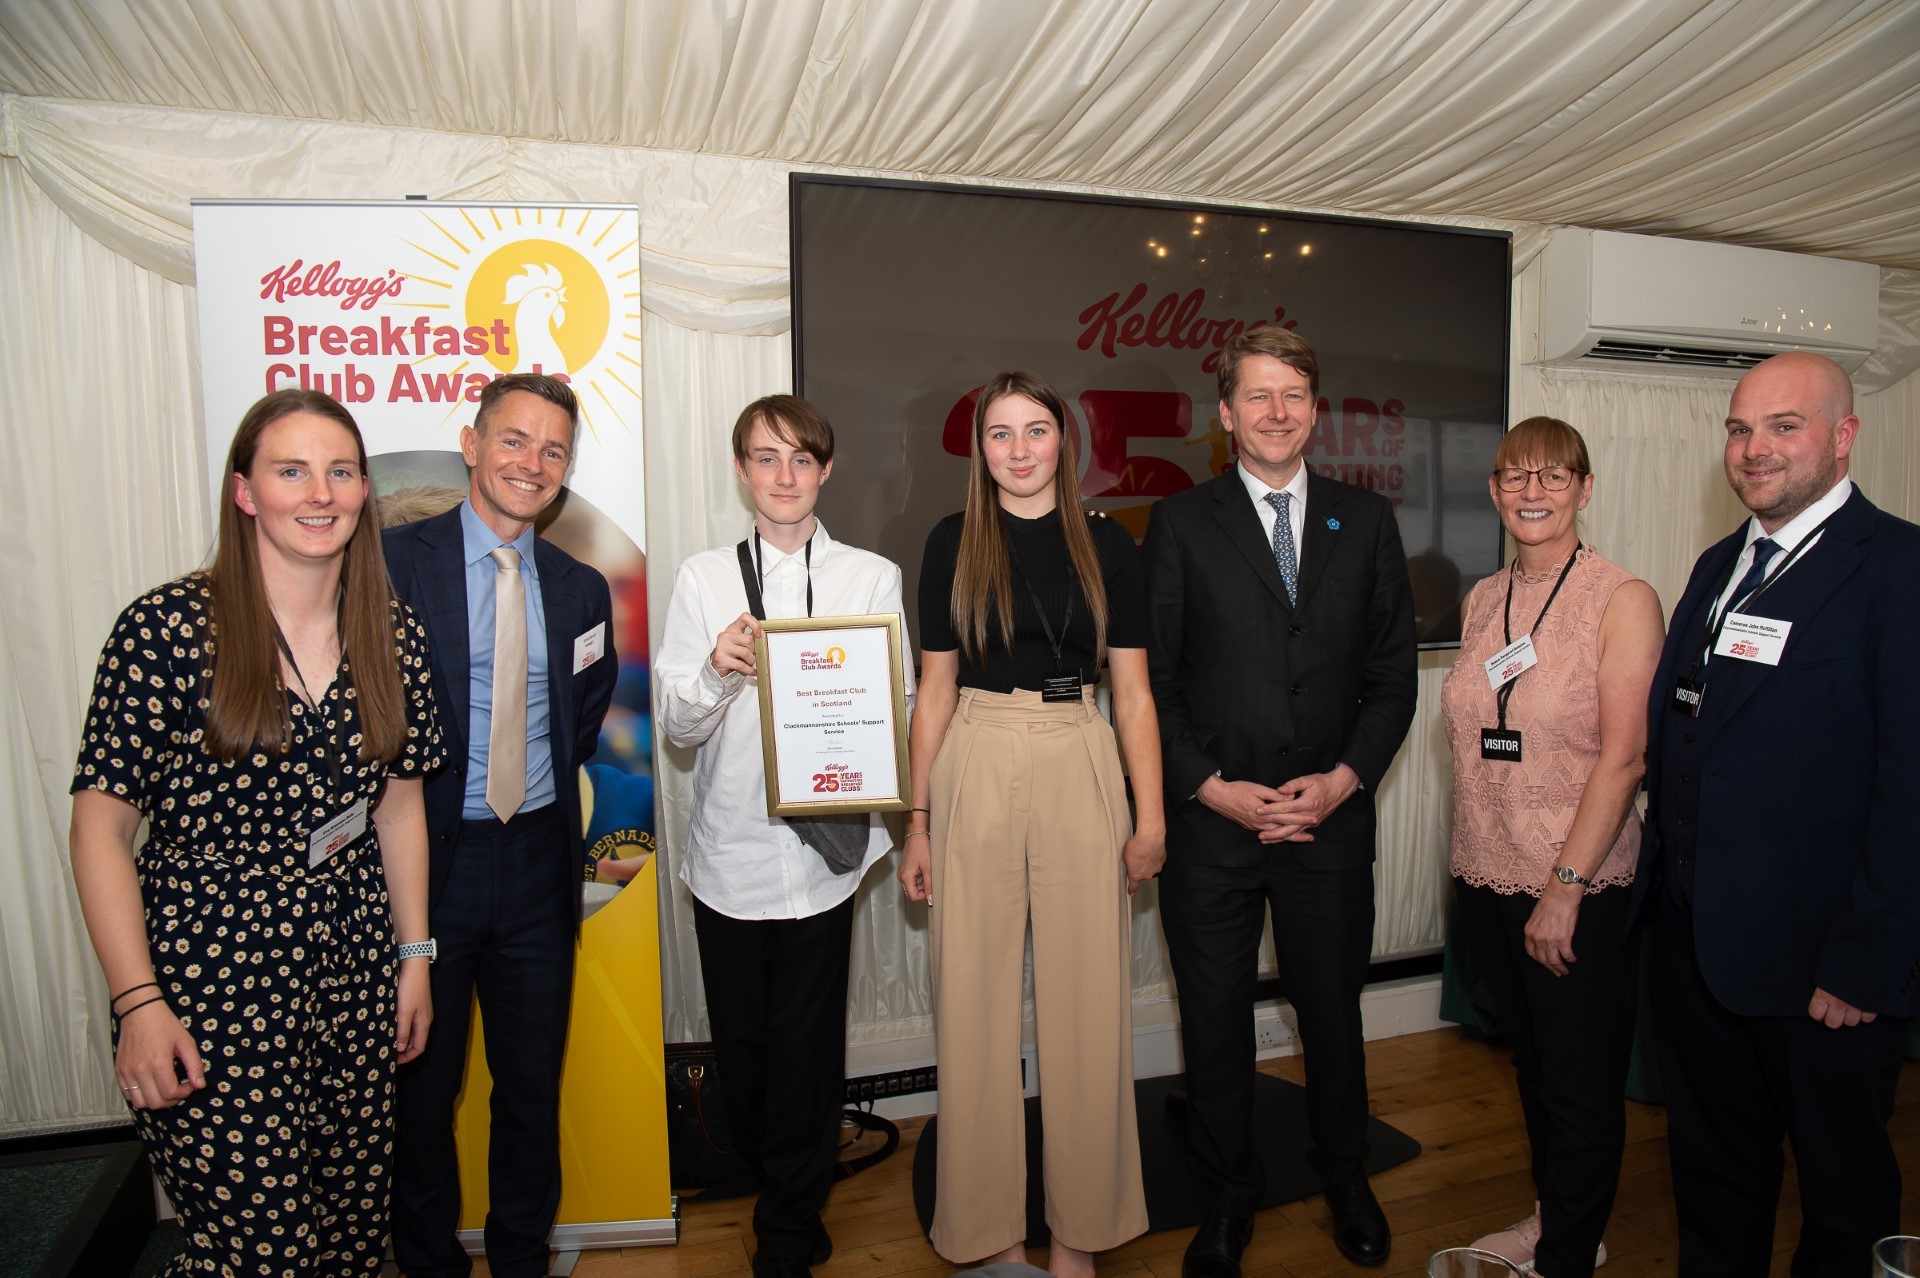 CHAMPIONS: The Clackmannanshire Schools Support Service was crowned the best breakfast club in Scotland. Pictures provided by Kelloggs.